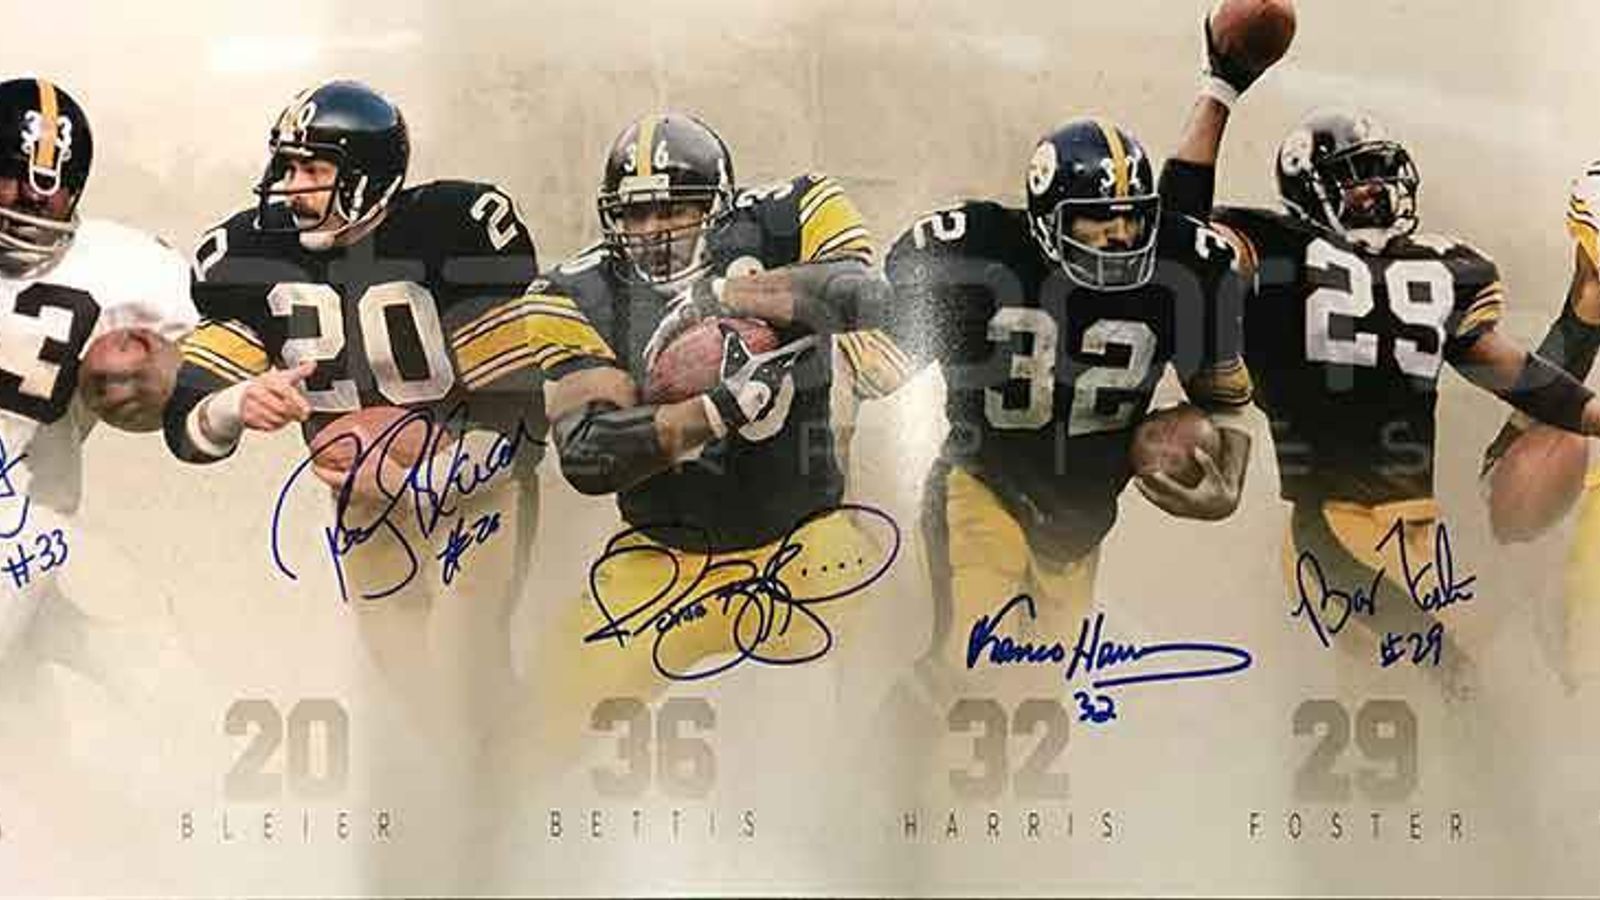 STEELERSHISTORY: First team to win 3 Super Bowls